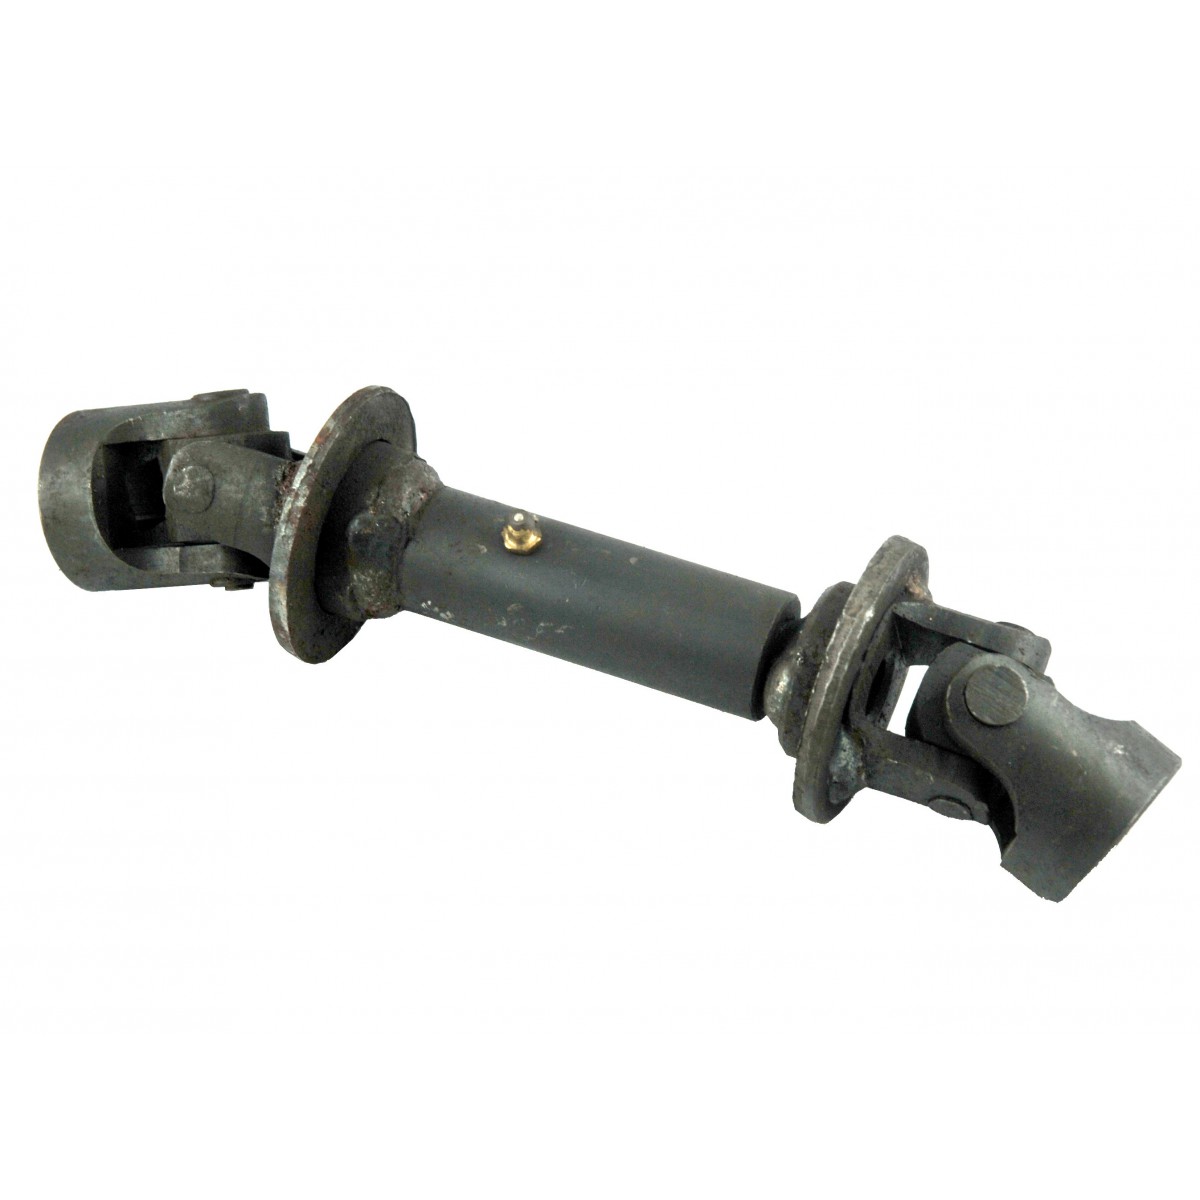 Cardan shaft used in WC8 wood chippers, drive-in shaft